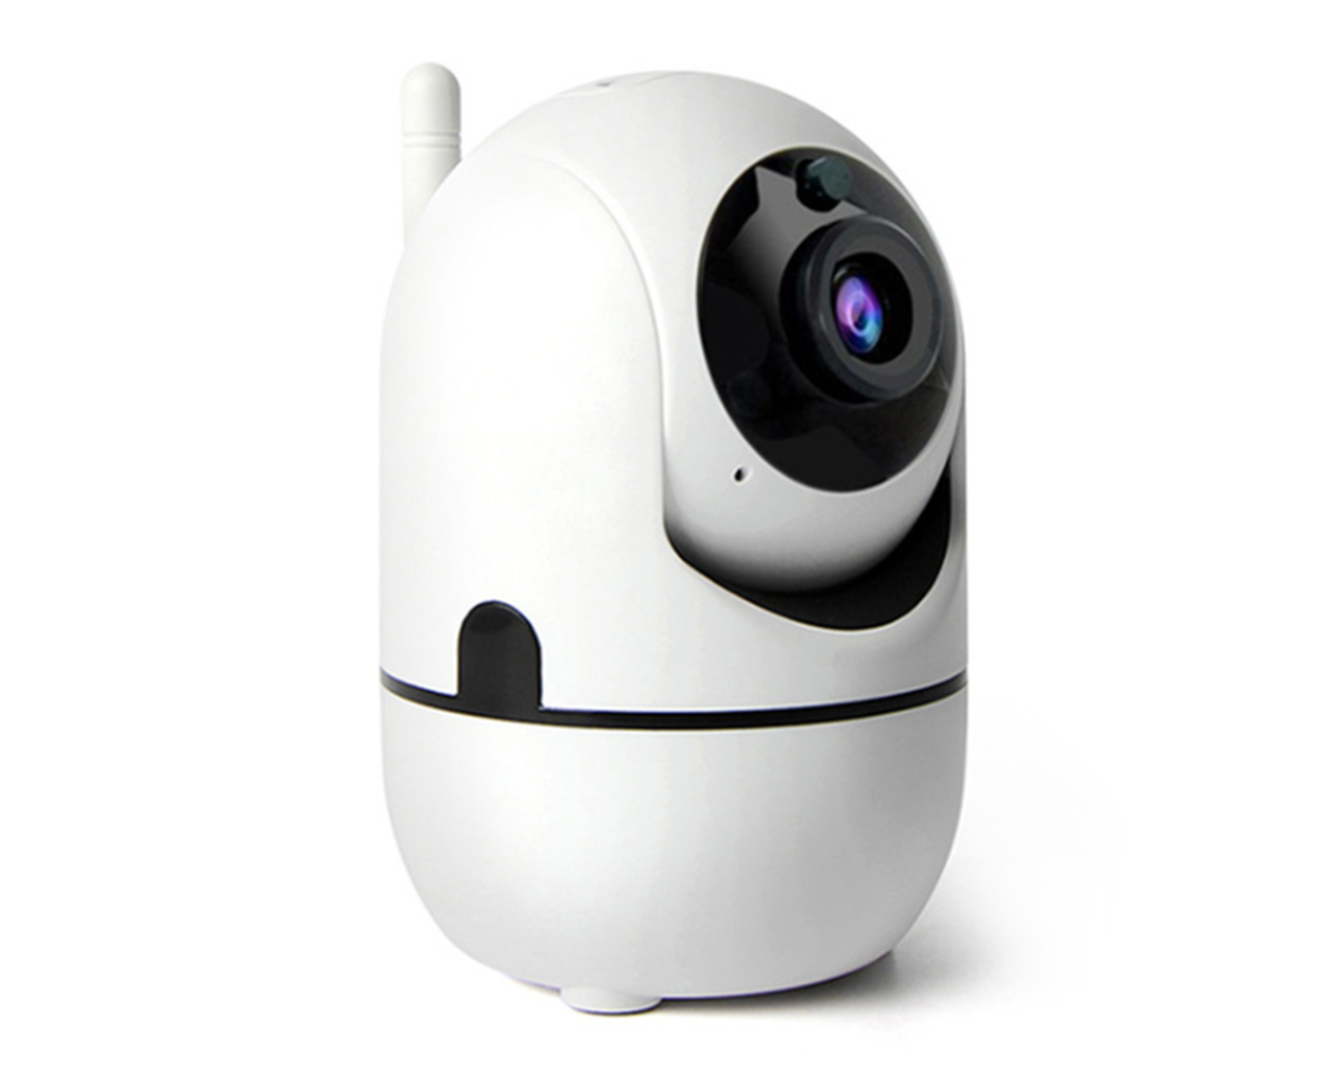 1080P WiFi Home IP Camera,Nanny cam with Auto Tracking, Cloud Service, Night Vision, Two Way Audio for Baby/Elder/Pet-WHITE